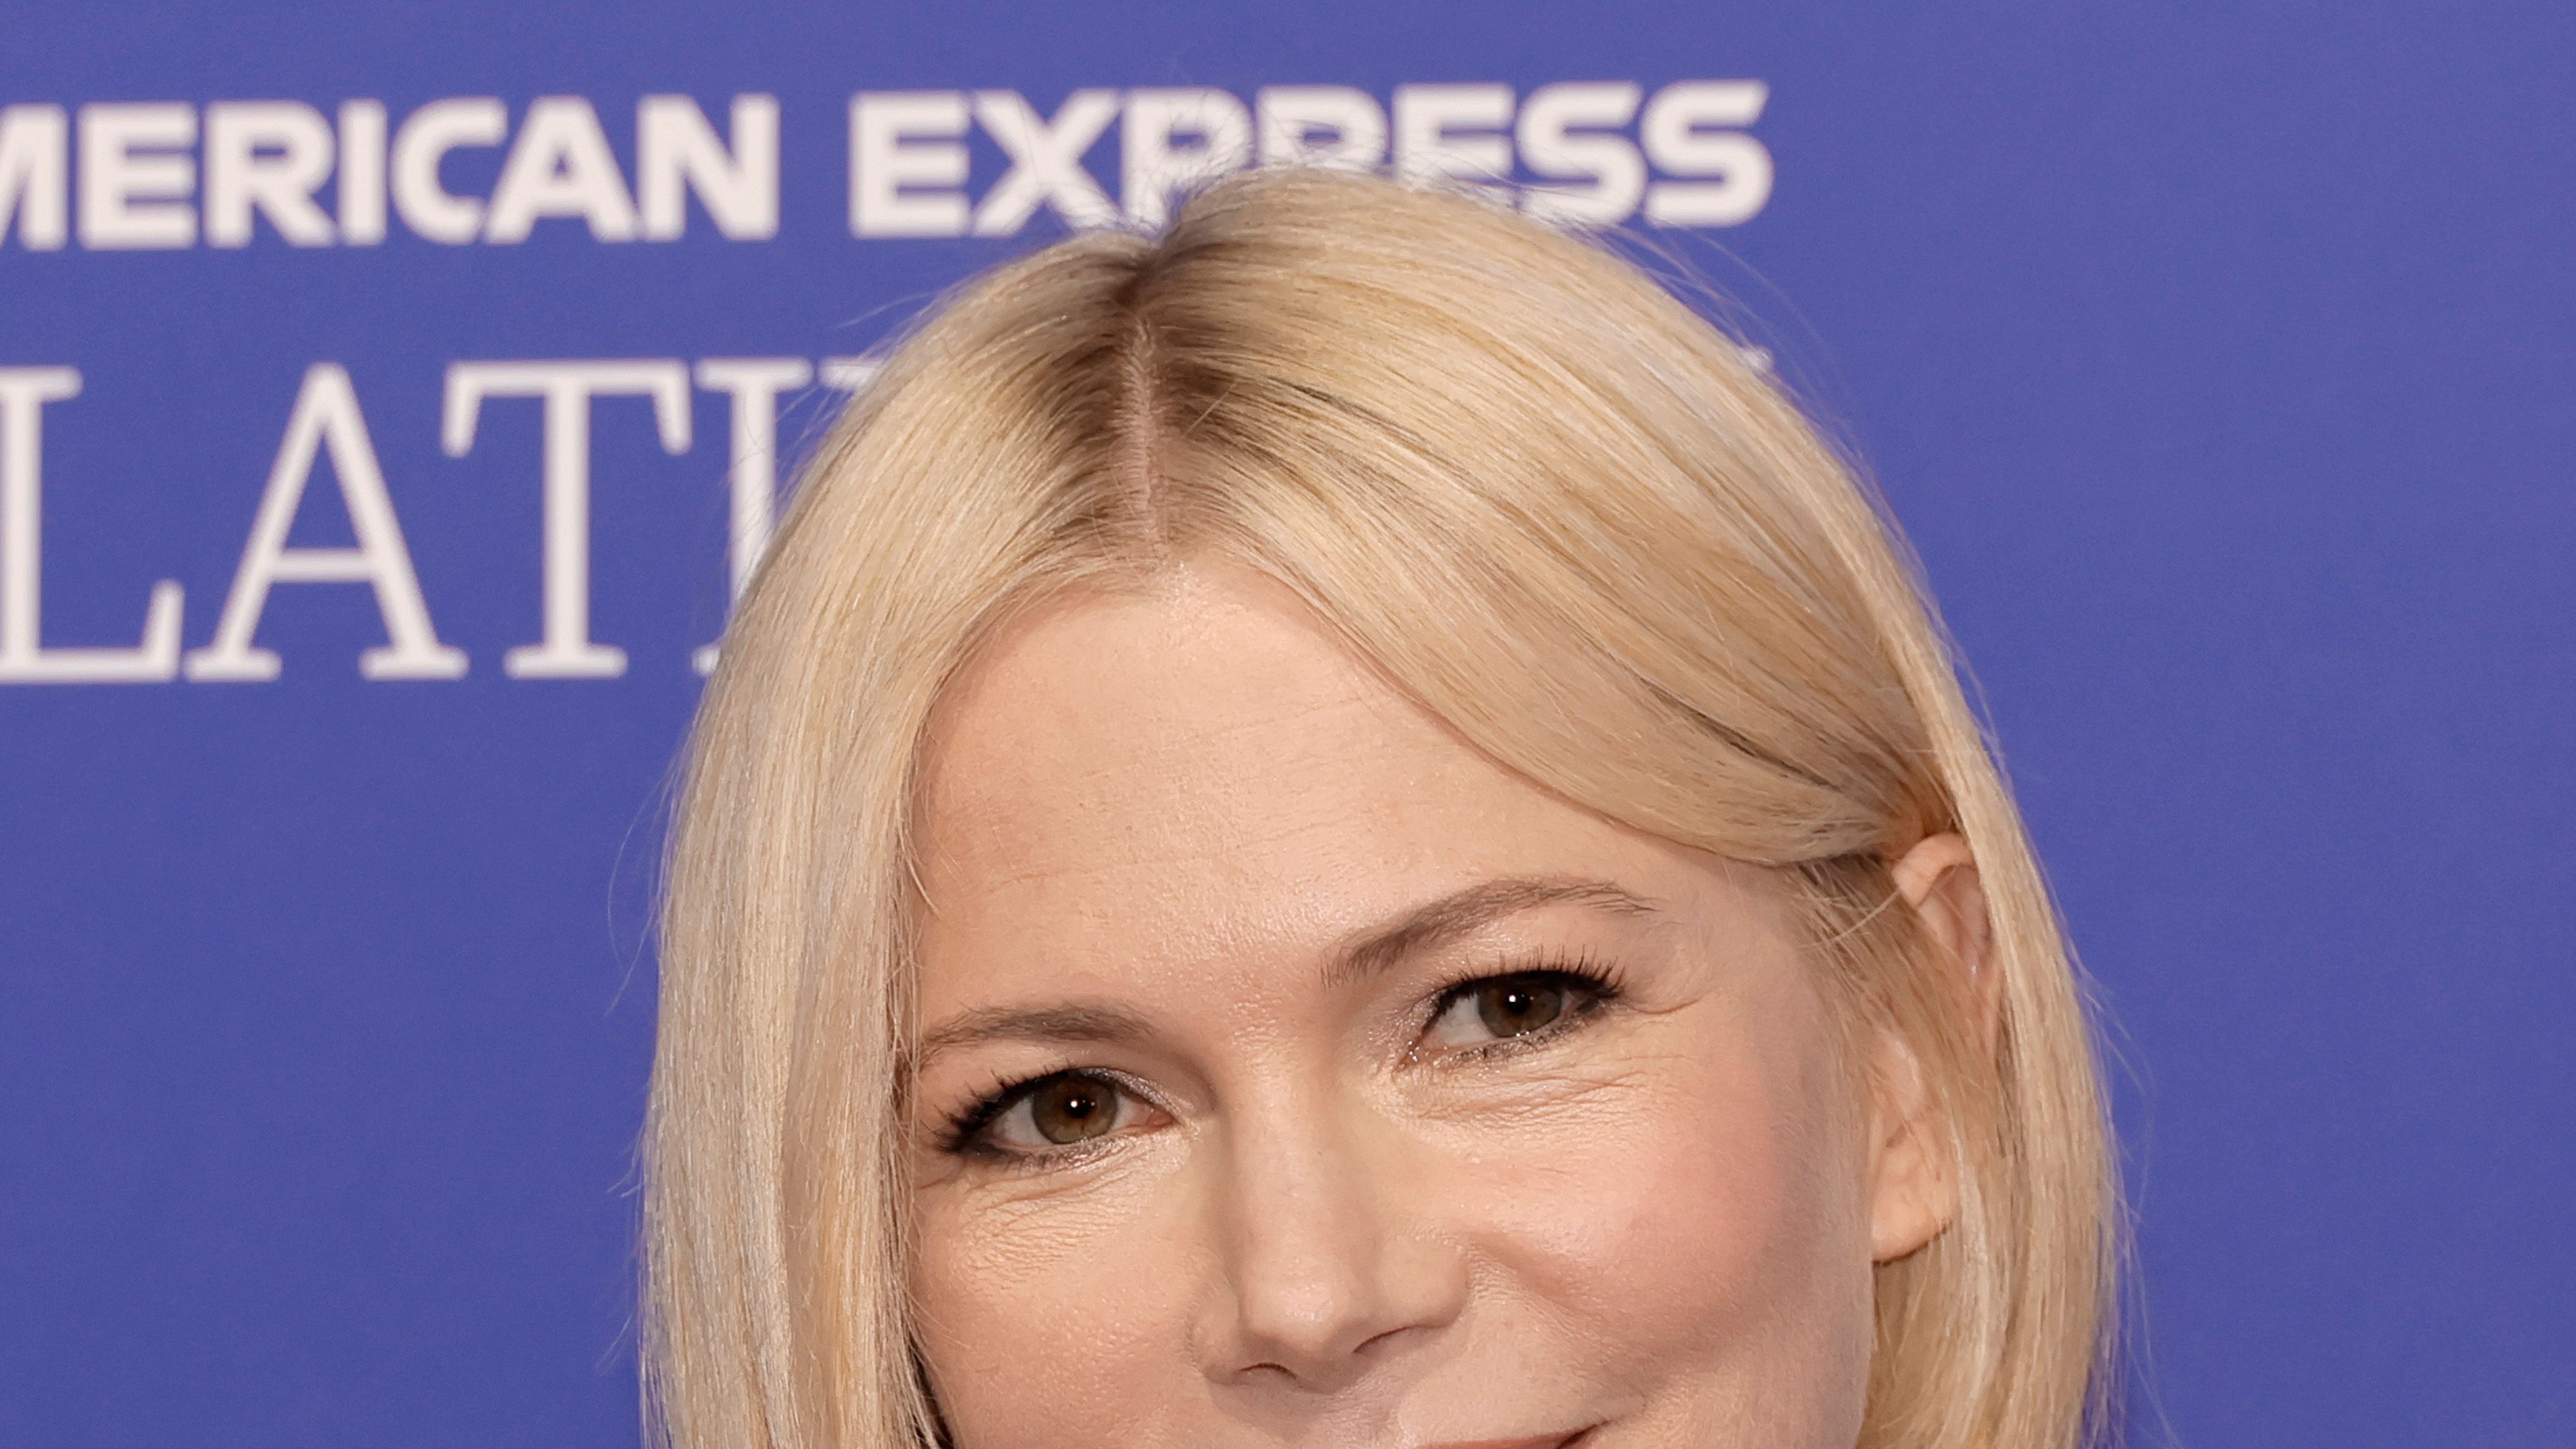 Michelle Williams' 'S' wave hairstyle is perfect on her chin-skimming bob